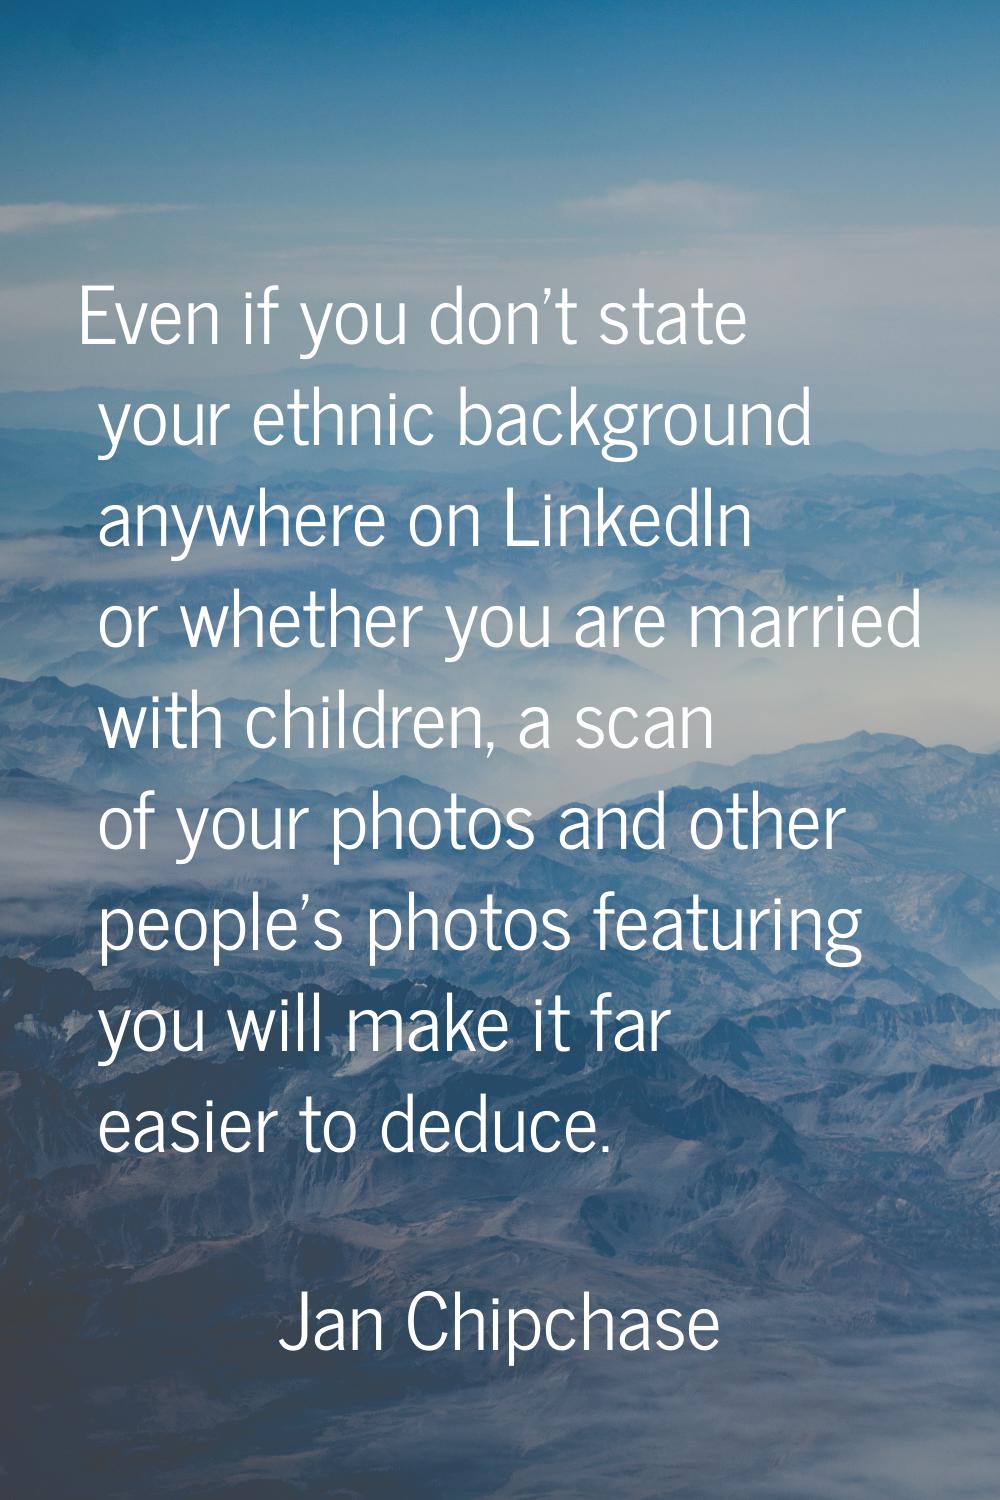 Even if you don't state your ethnic background anywhere on LinkedIn or whether you are married with